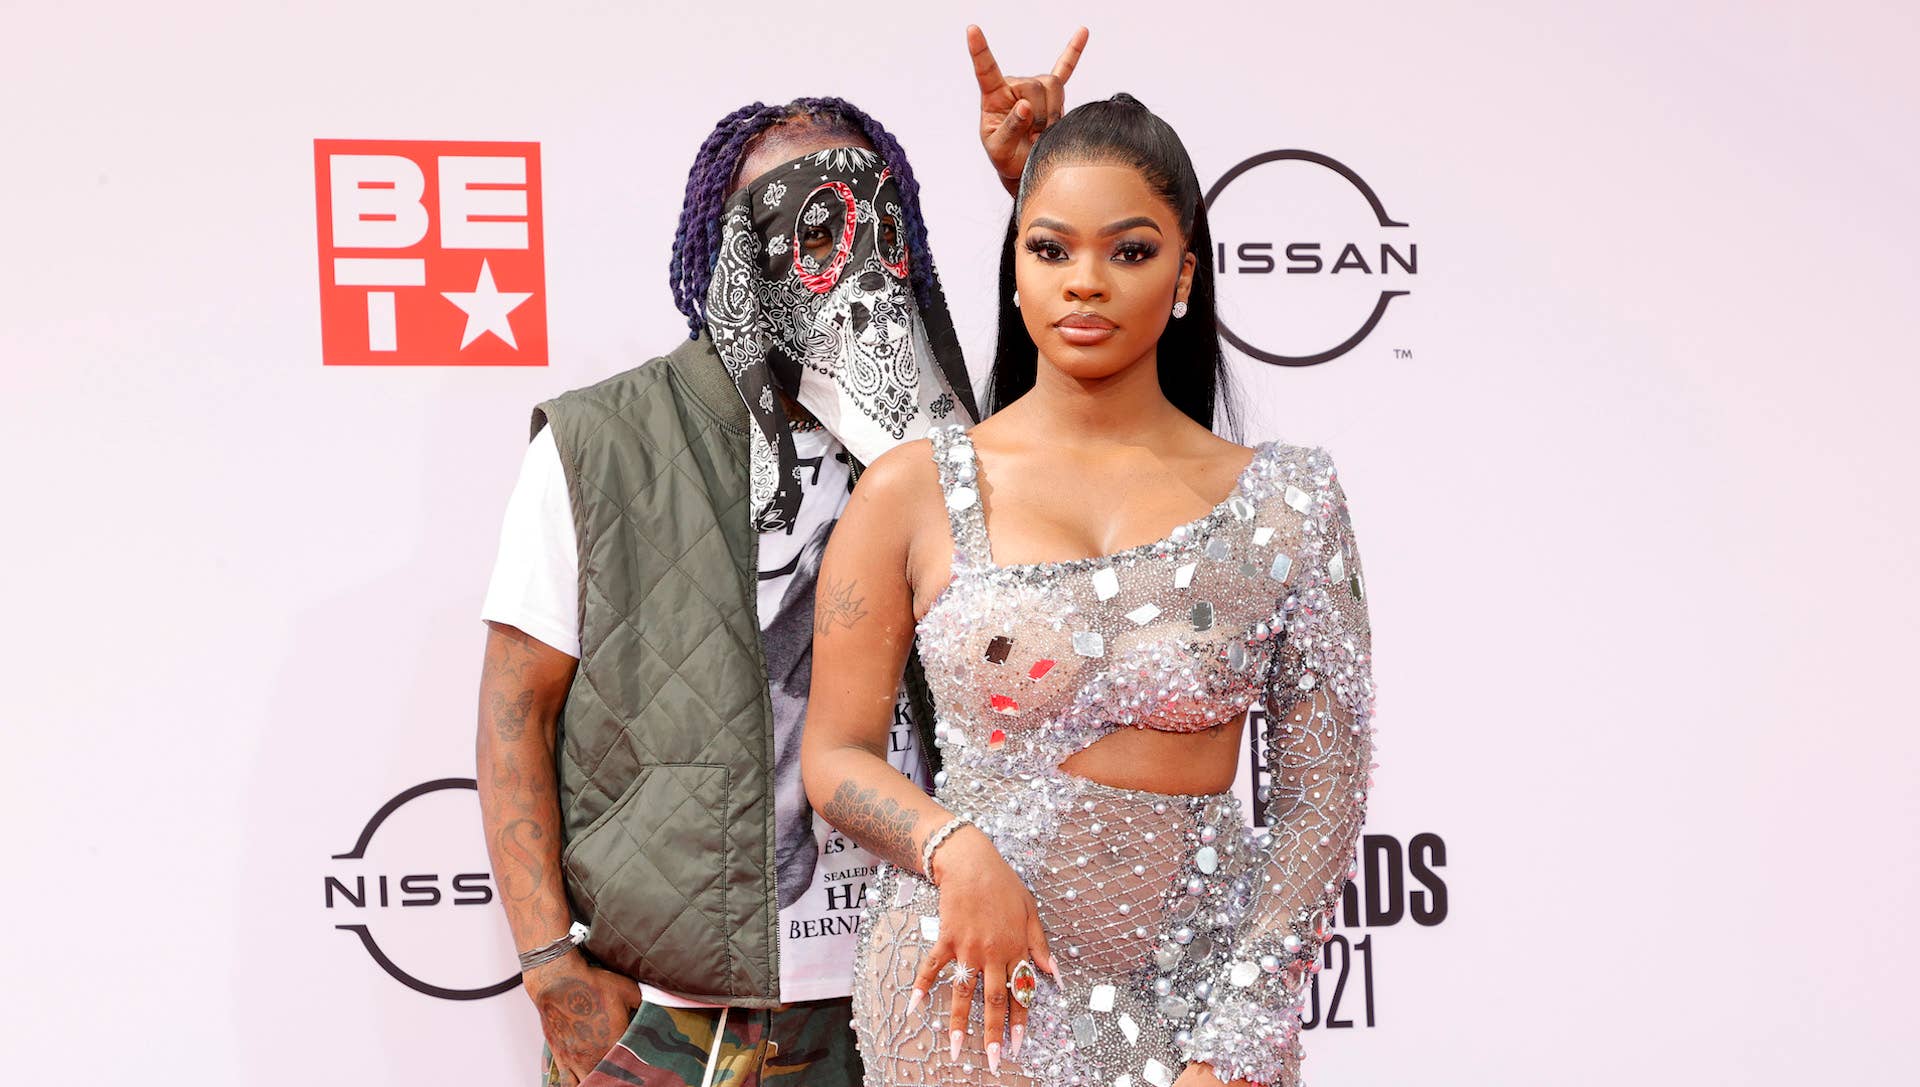 Lil Uzi Vert and JT of City Girls attend the BET Awards 2021 at Microsoft Theater